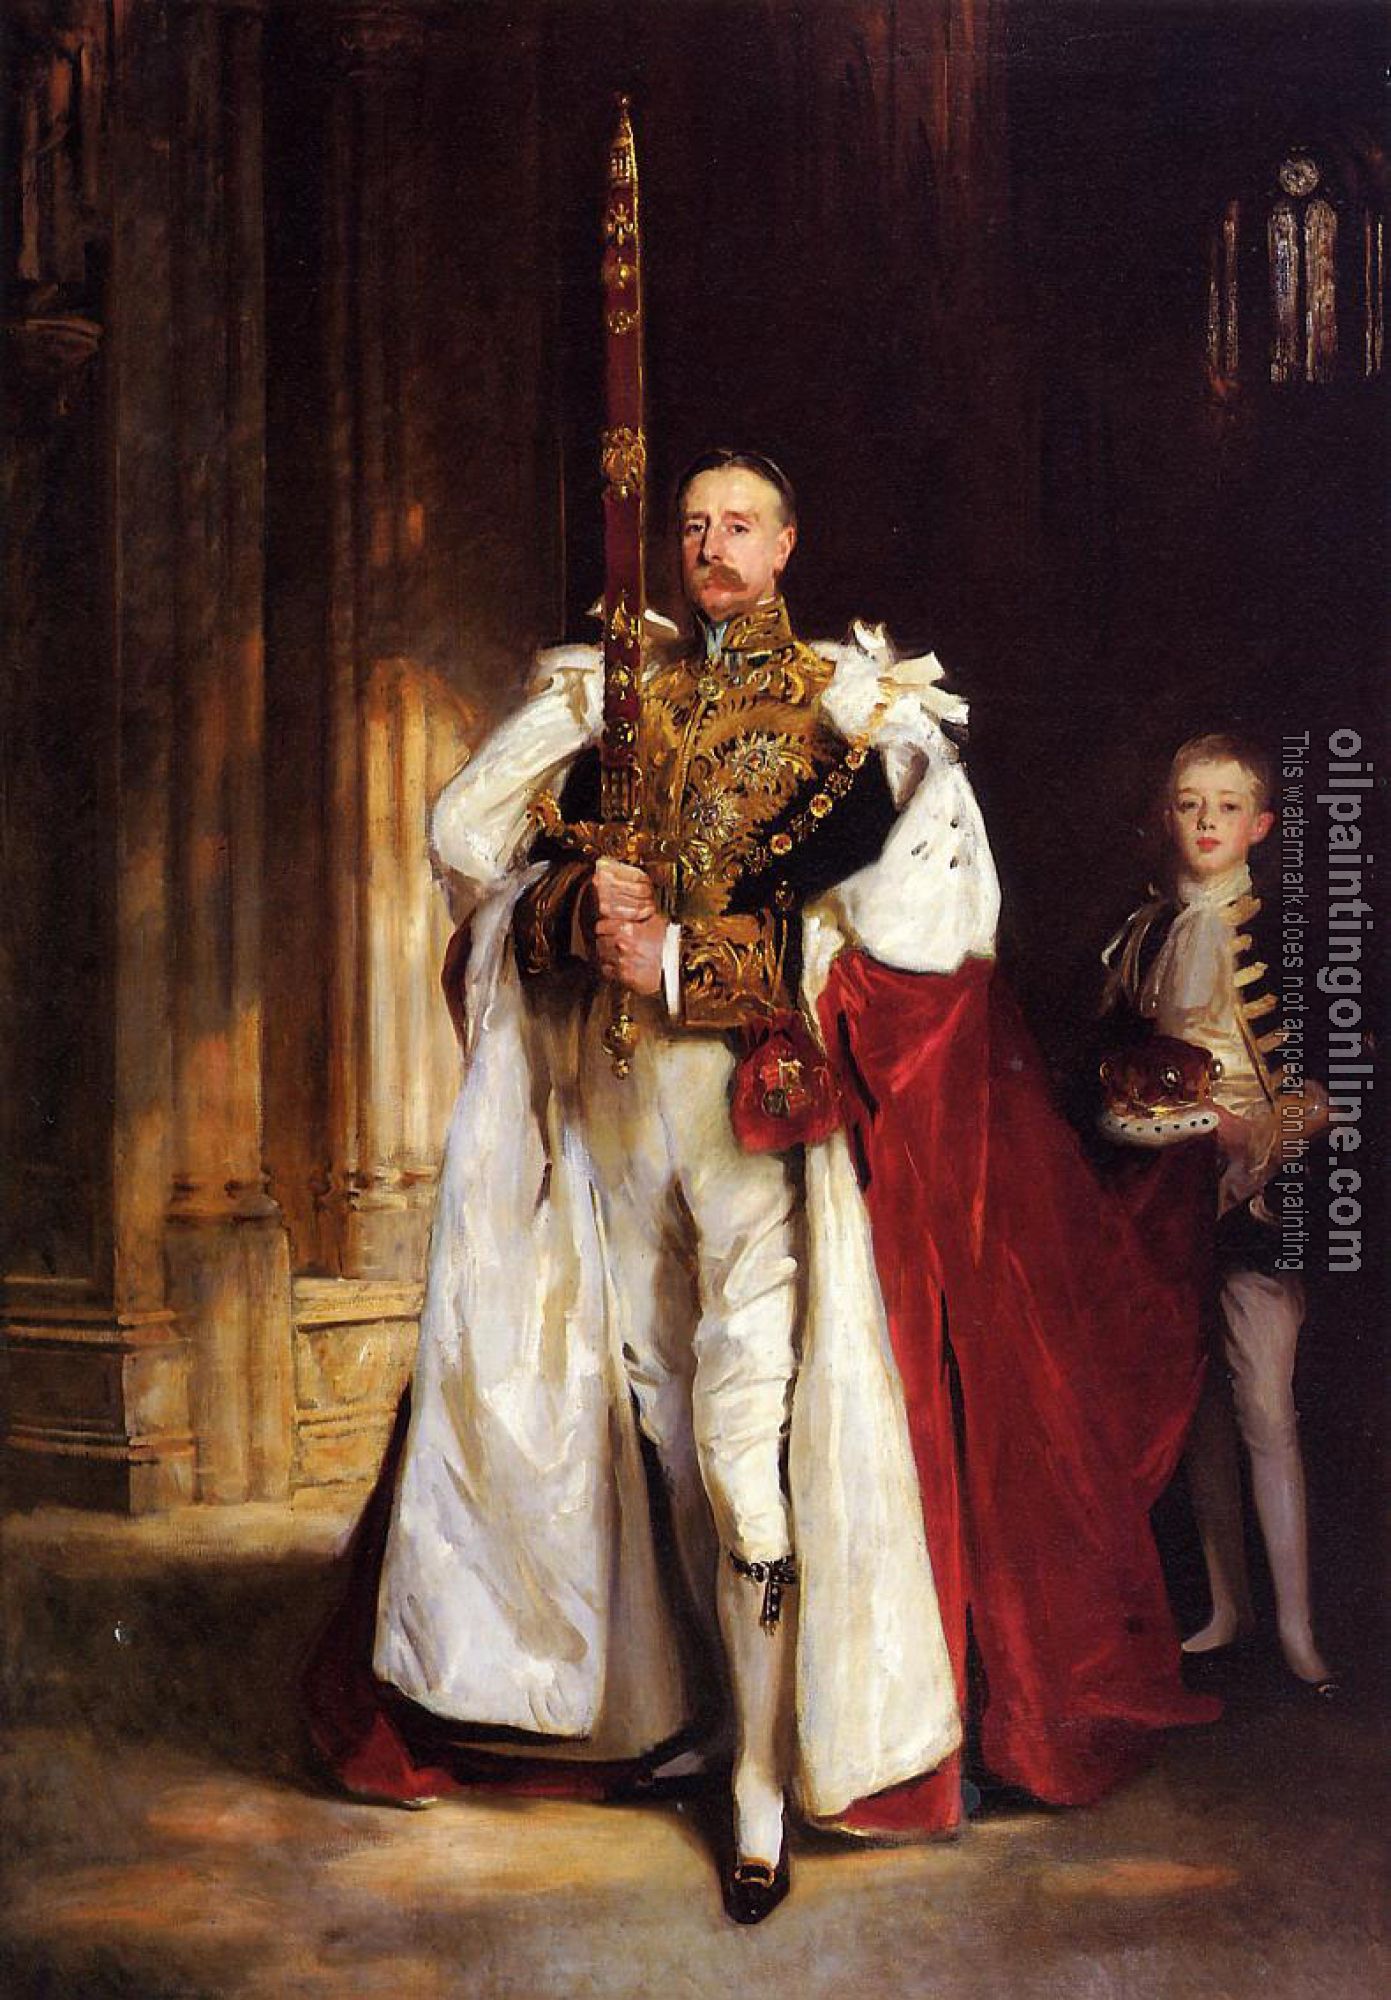 Sargent, John Singer - Charles Stewart, Sixth Marquess of Londonderry, Carrying the Great Sword of State at the Coronat